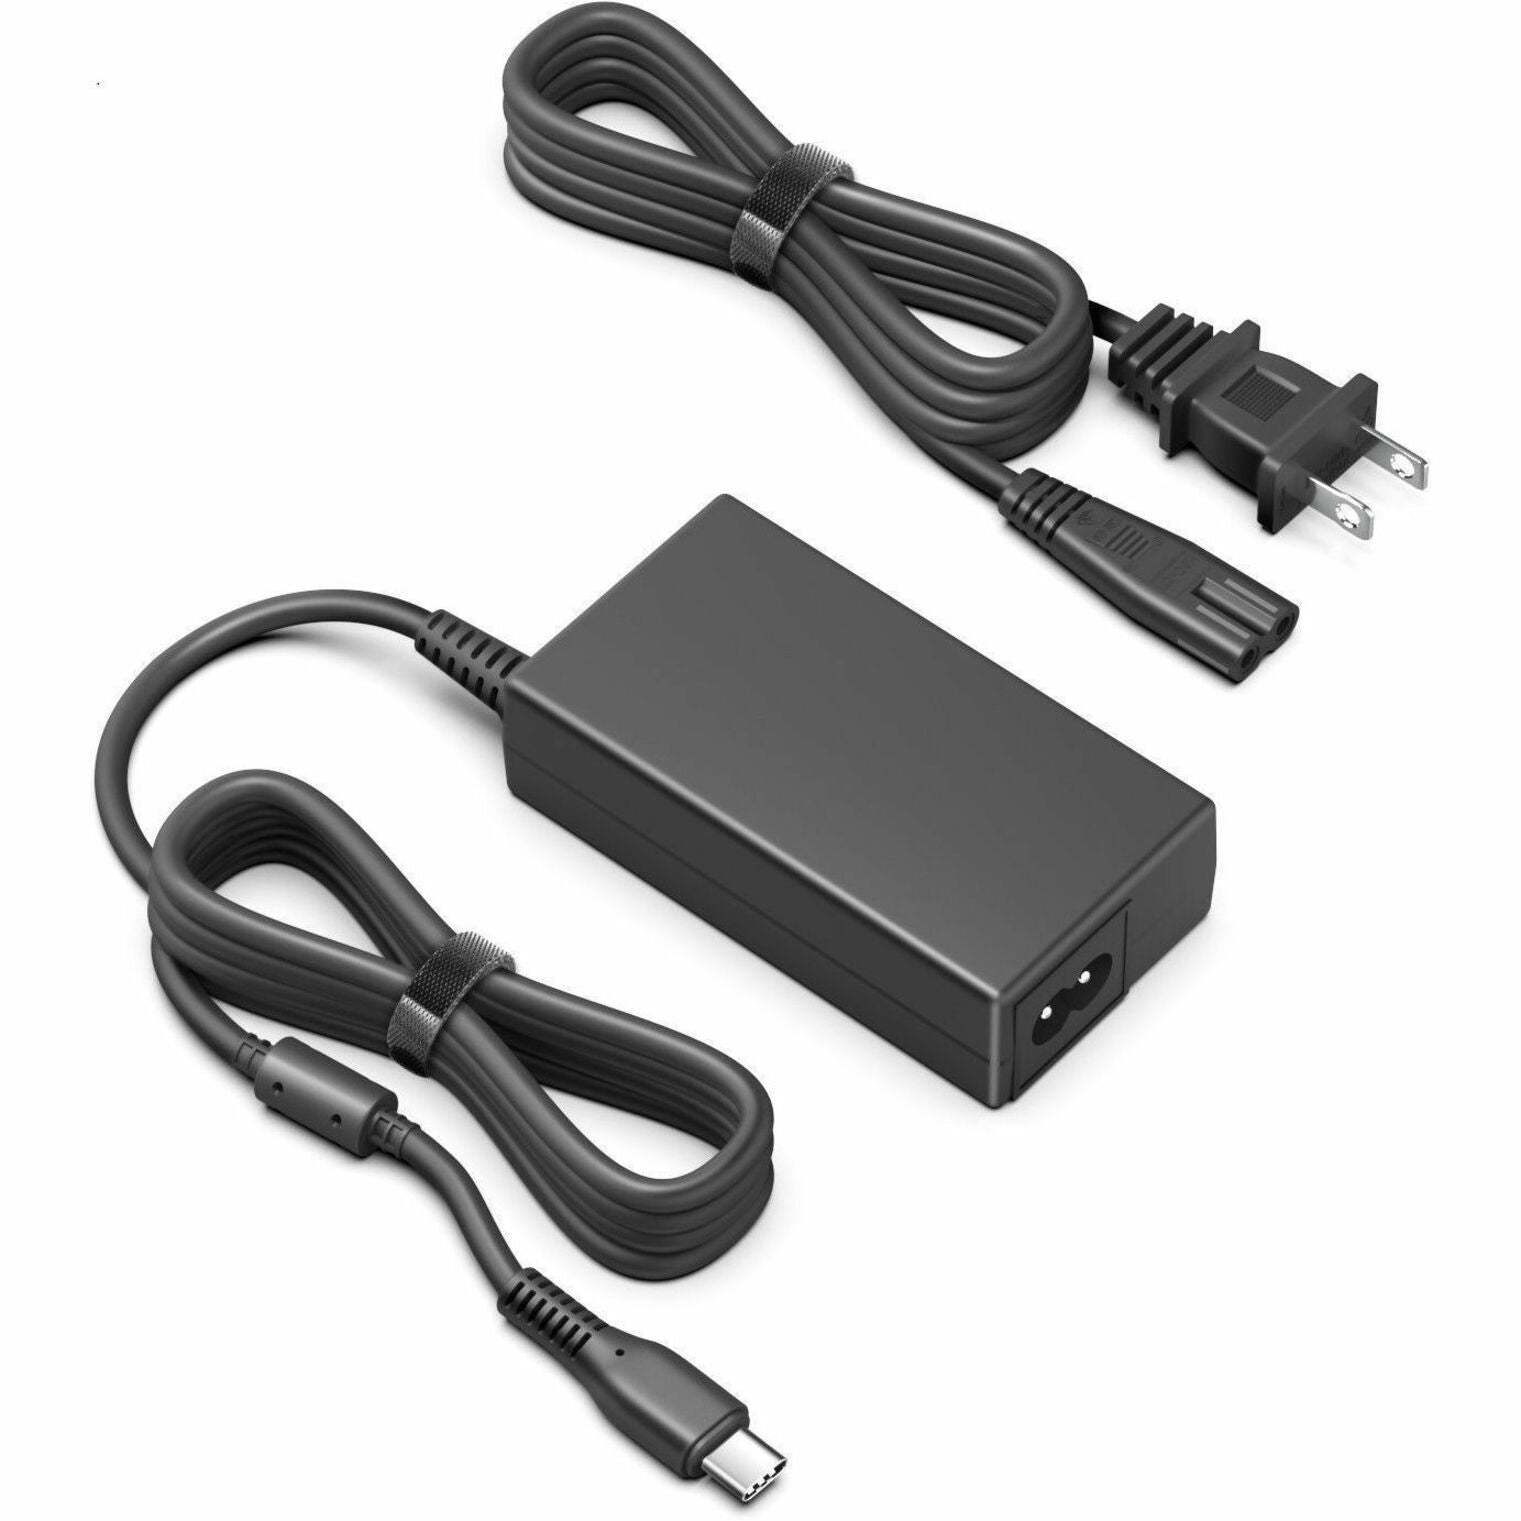 BTI KP.06503.020-BTI AC Adapter, Universal Charger for Acer Chromebook and Notebook